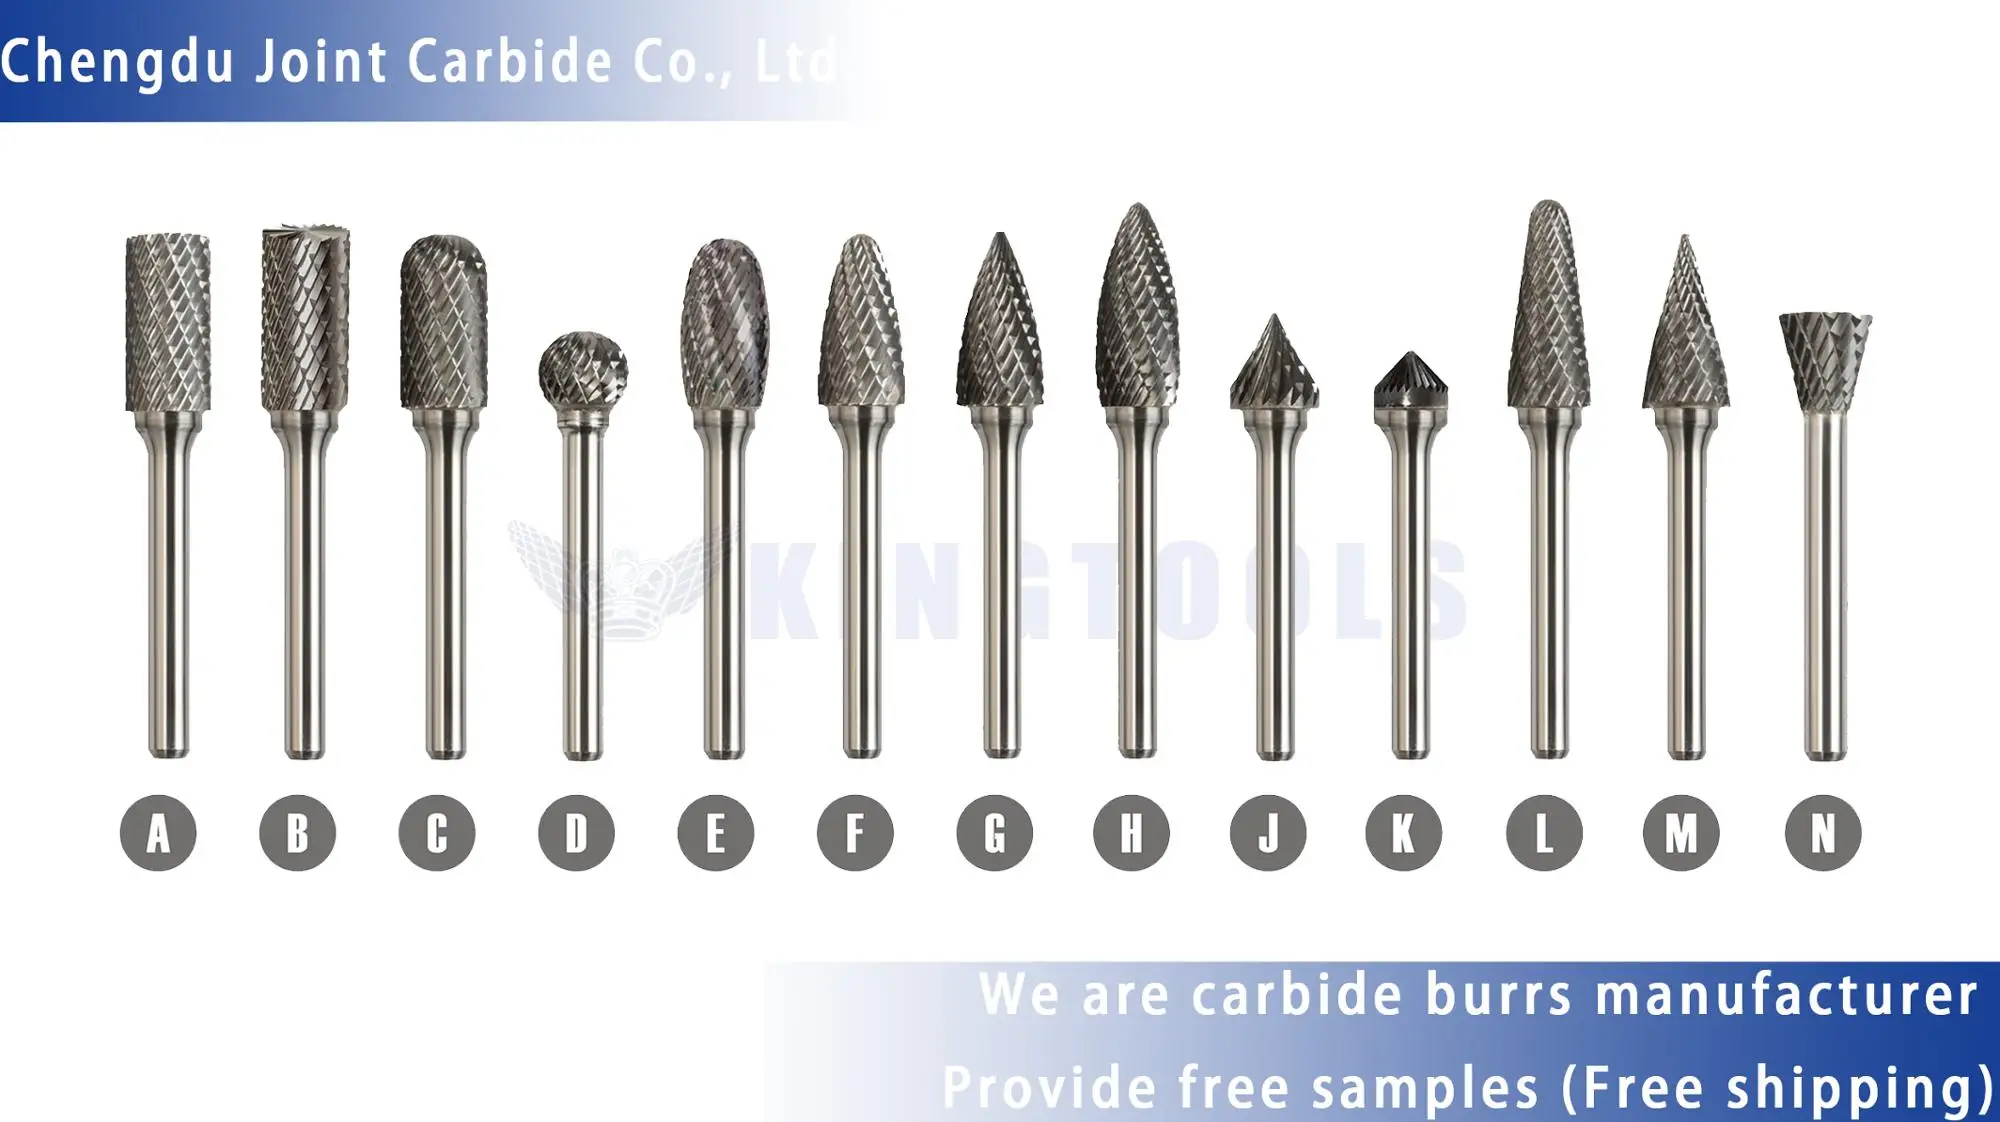 INDUSTRIAL QUALITY 6MM SHANK CARBIDE BURR 7/32" DOUBLE CUT SA-14 ROTARY TOOLS 